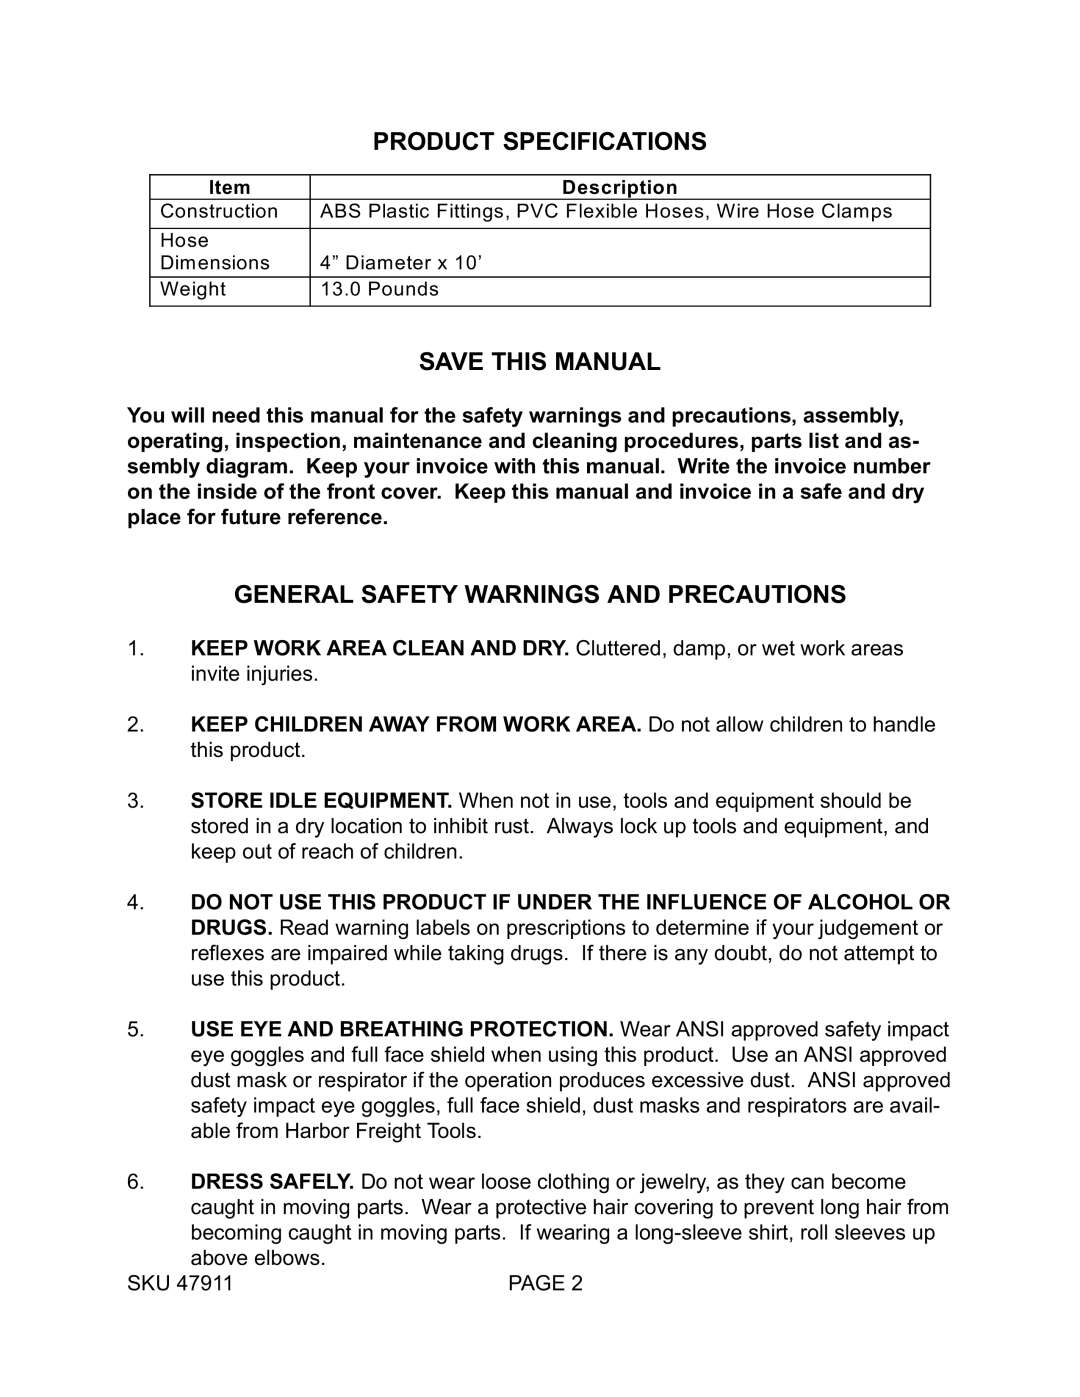 Harbor Freight Tools 47911 Product Specifications Save this Manual, General Safety Warnings and Precautions 